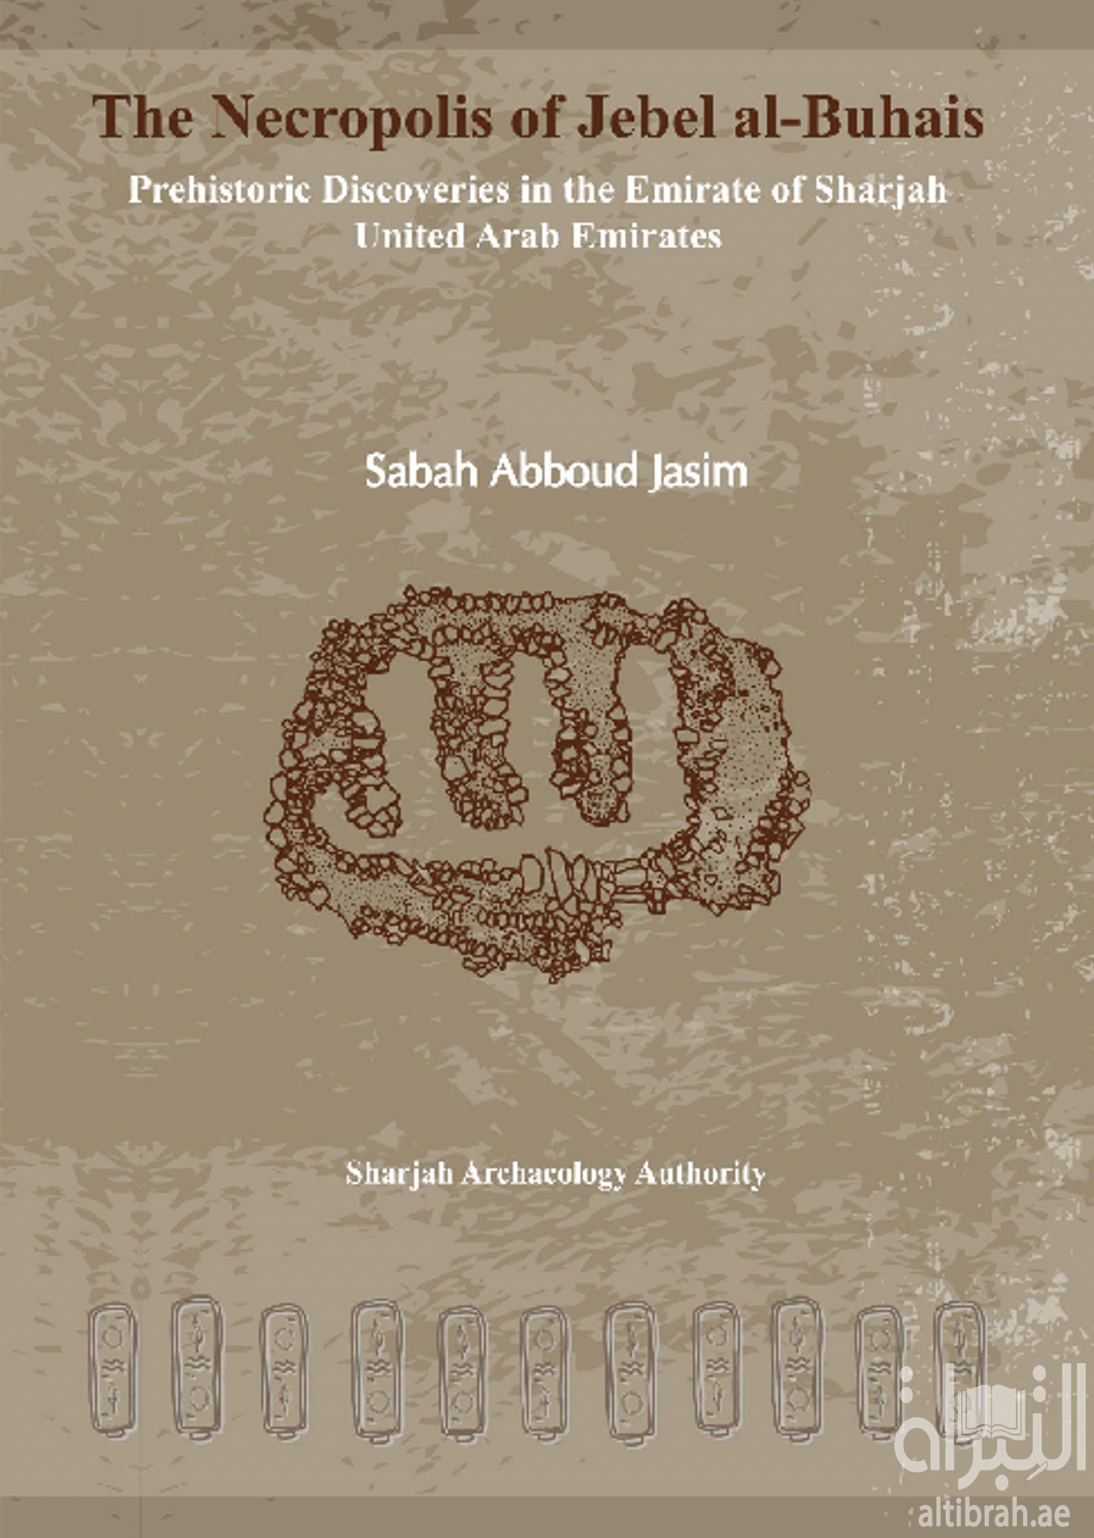 The Necropolis of Jebel al-Buhais - Prehistoric Discoveries in the Emirate of Sharjah